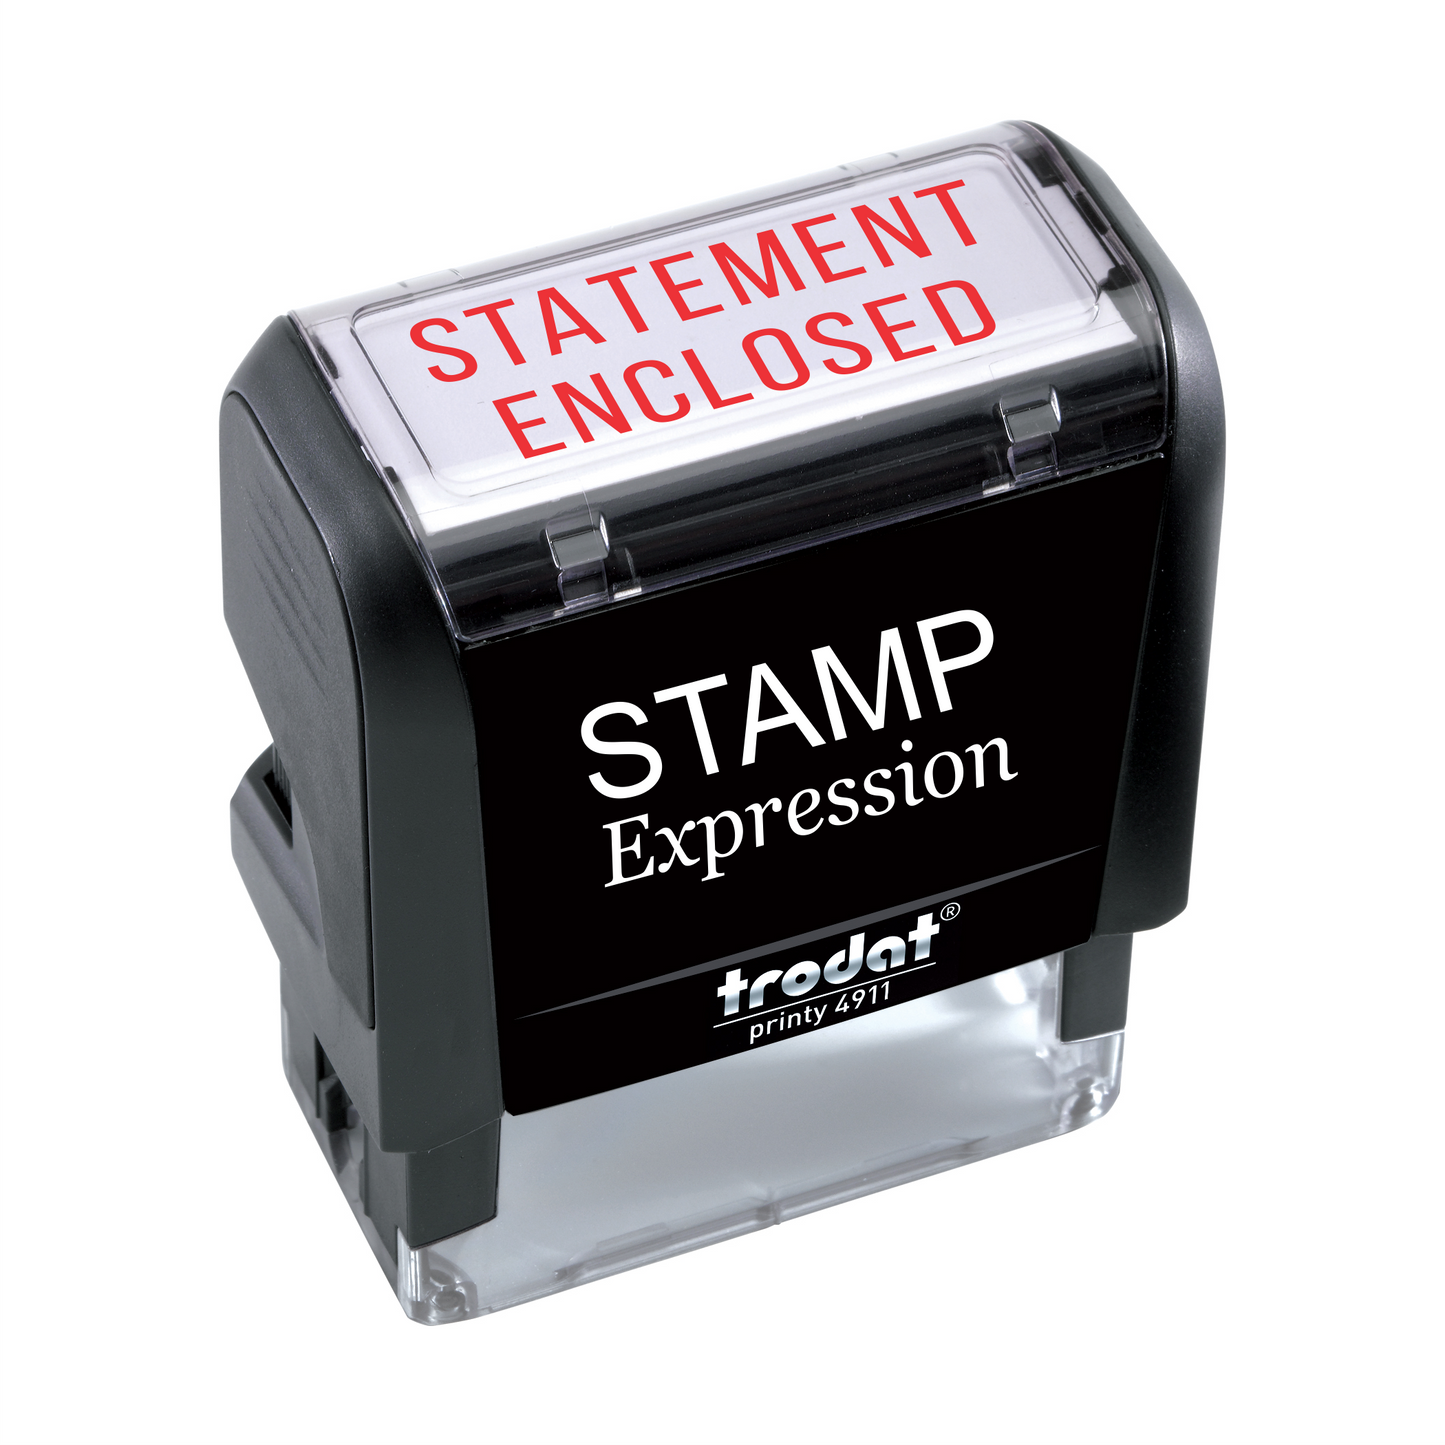 Statement Enclosed Office Self Inking Rubber Stamp (SH-5413)